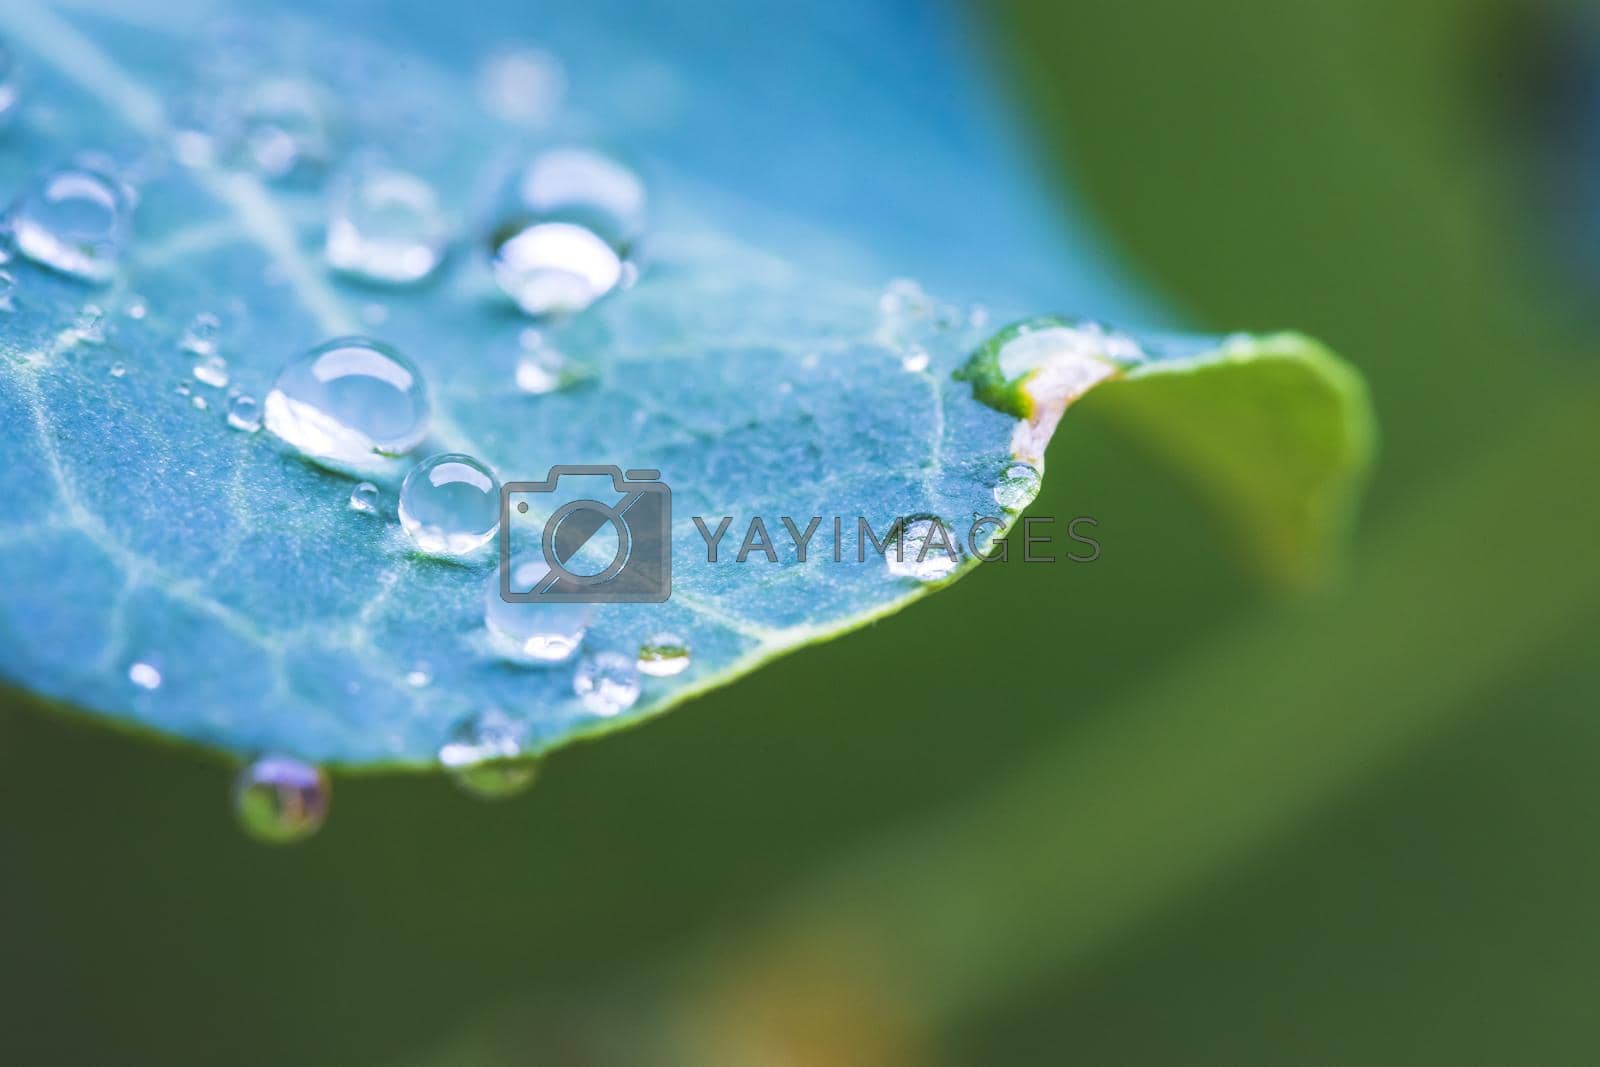 Royalty free image of Environment, freshness and nature concept: Macro of big waterdrops on green leaf after rain. Beautiful leaf texture. by Daxenbichler